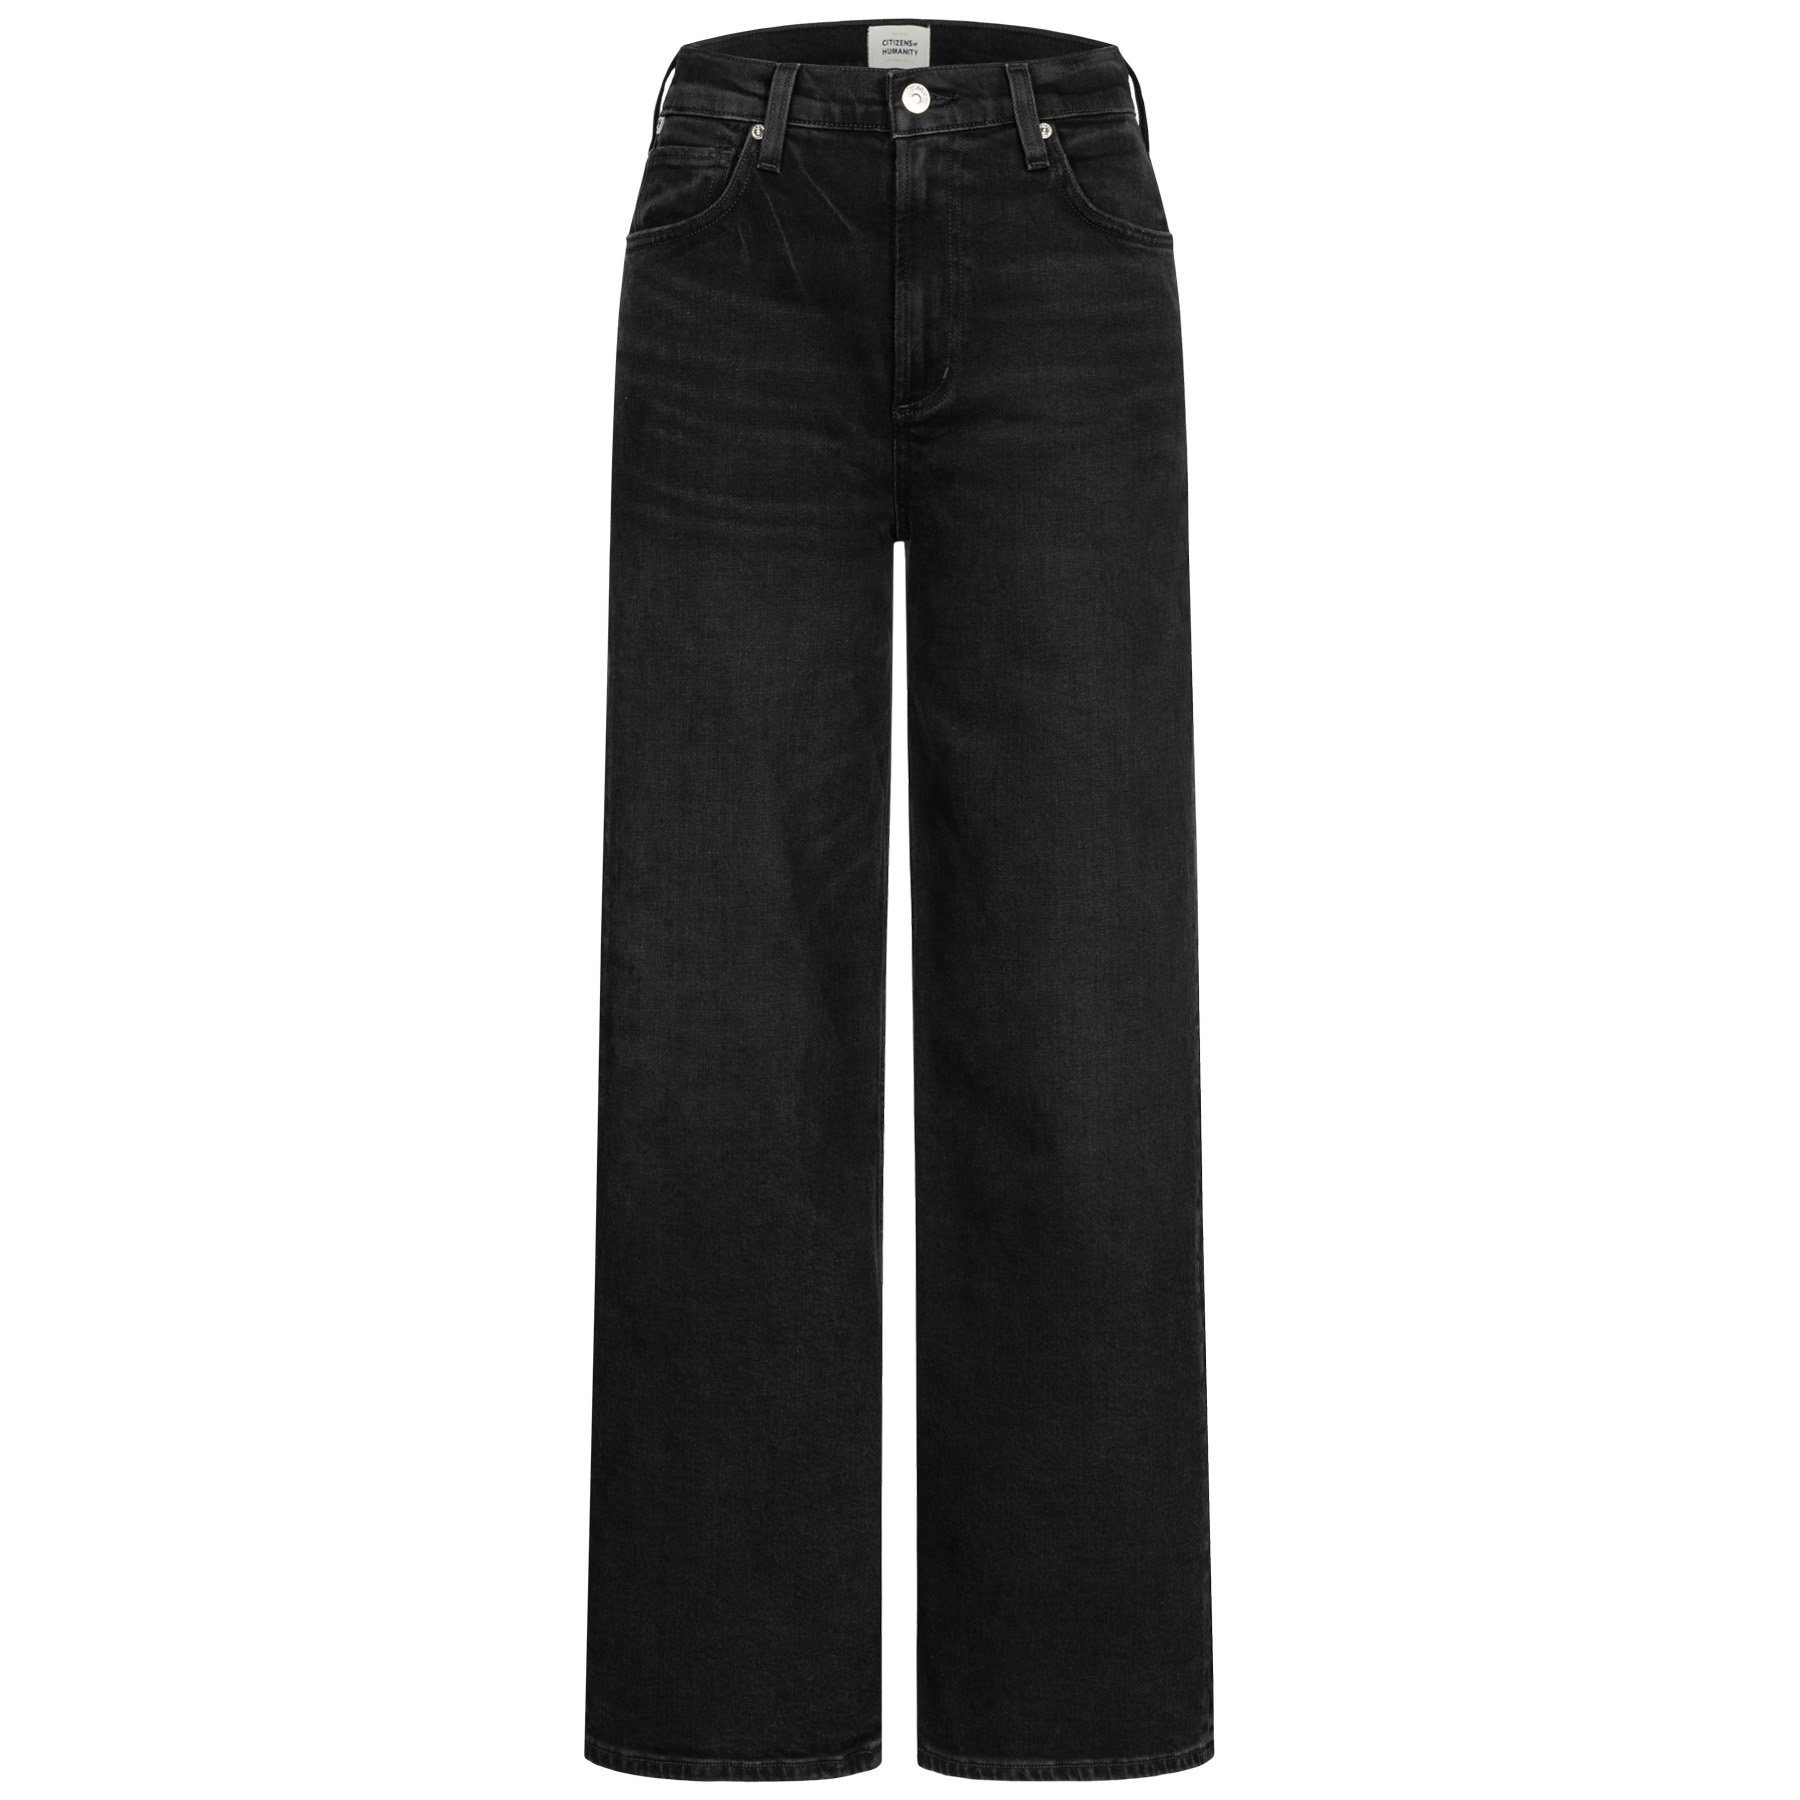 CITIZENS OF HUMANITY aus Baumwolle Jeans PALOMA Straight-Jeans